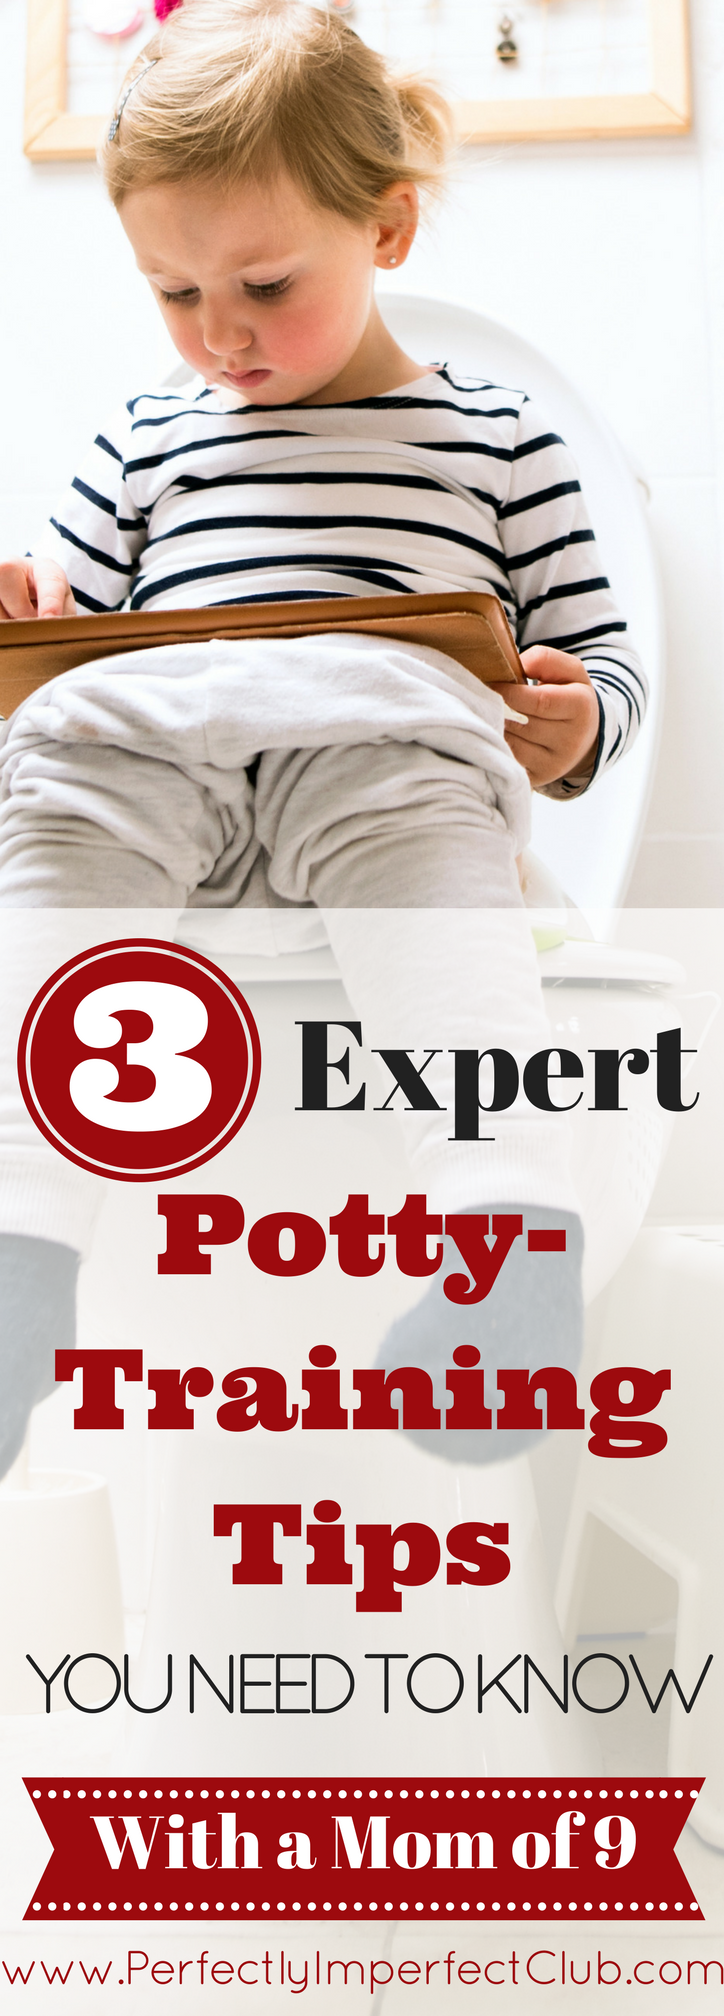 This Mom of 9 shares her must-know tips for easy potty training!